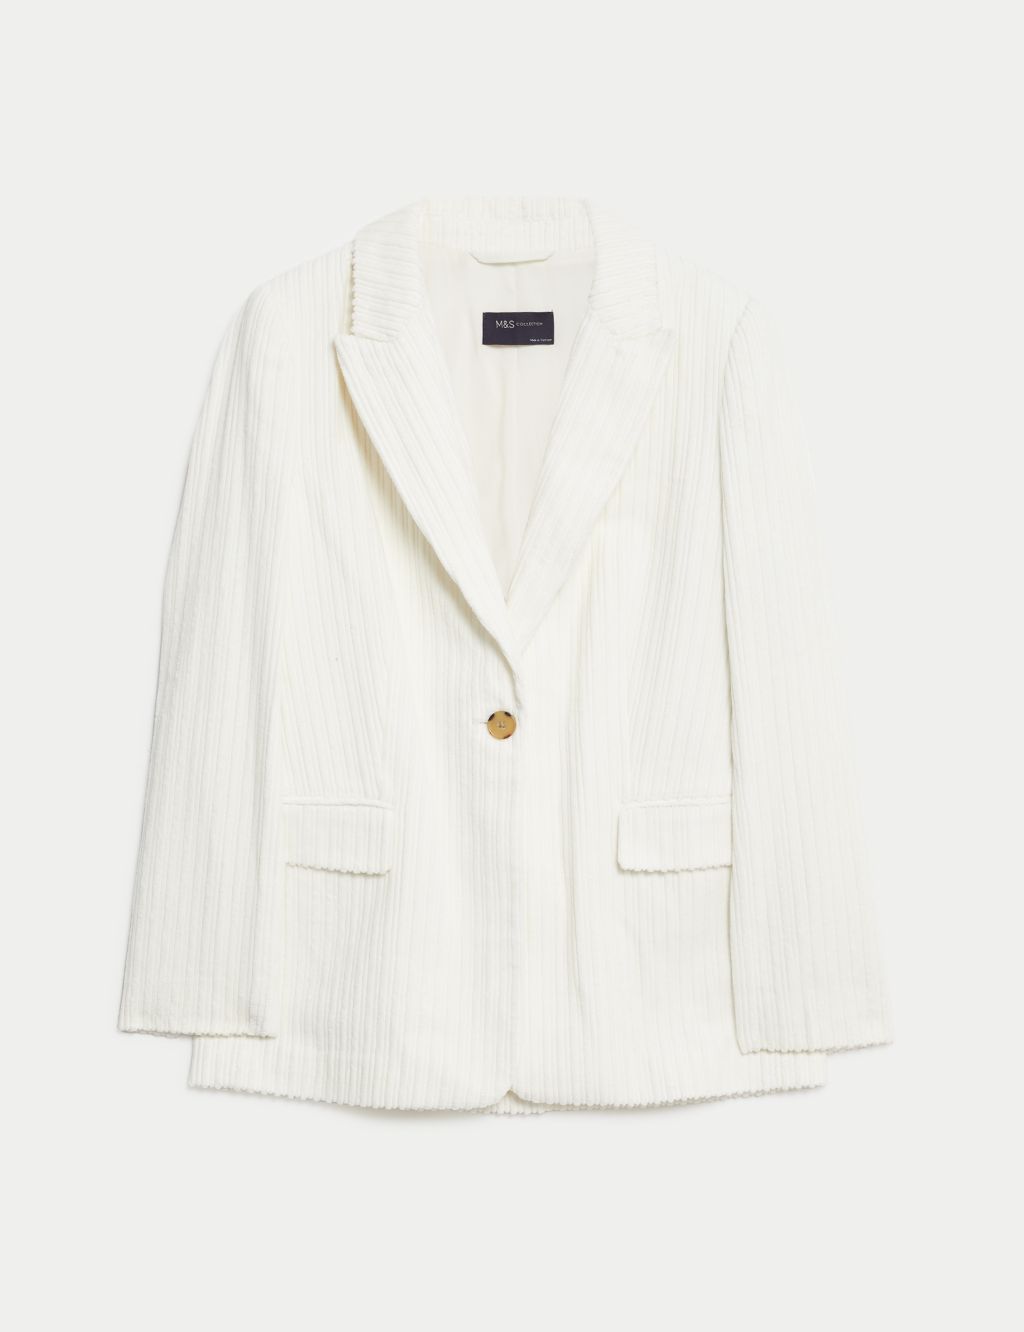 Cord Relaxed Textured Single Breasted Blazer image 2